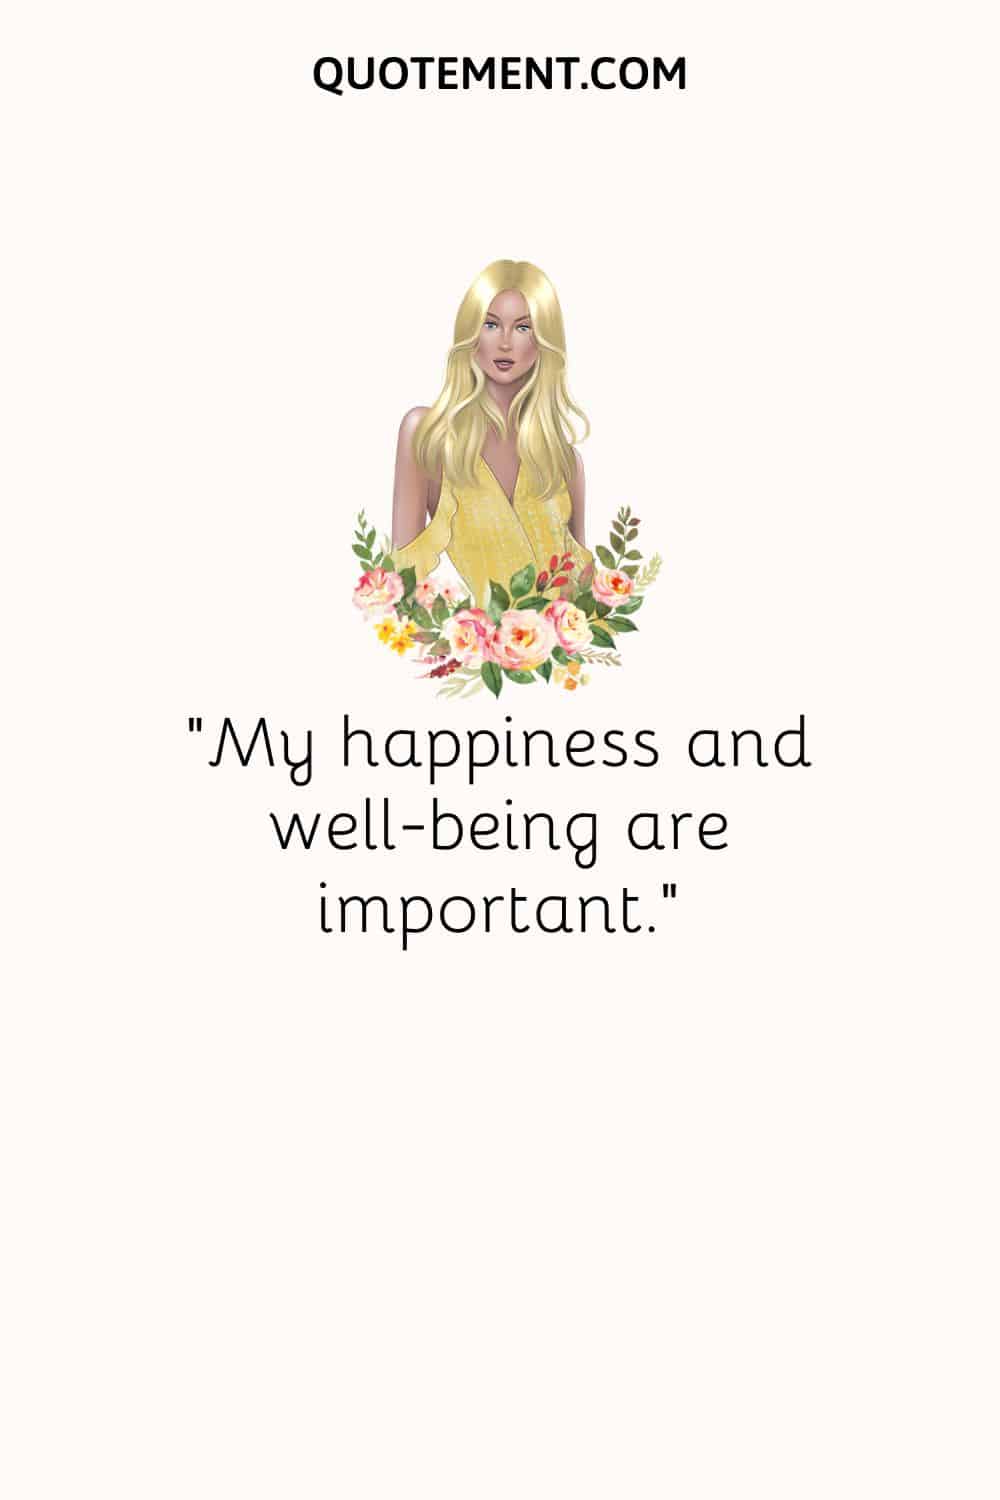 image of flowers and blonde lady in yellow dress representing self esteem affirmation